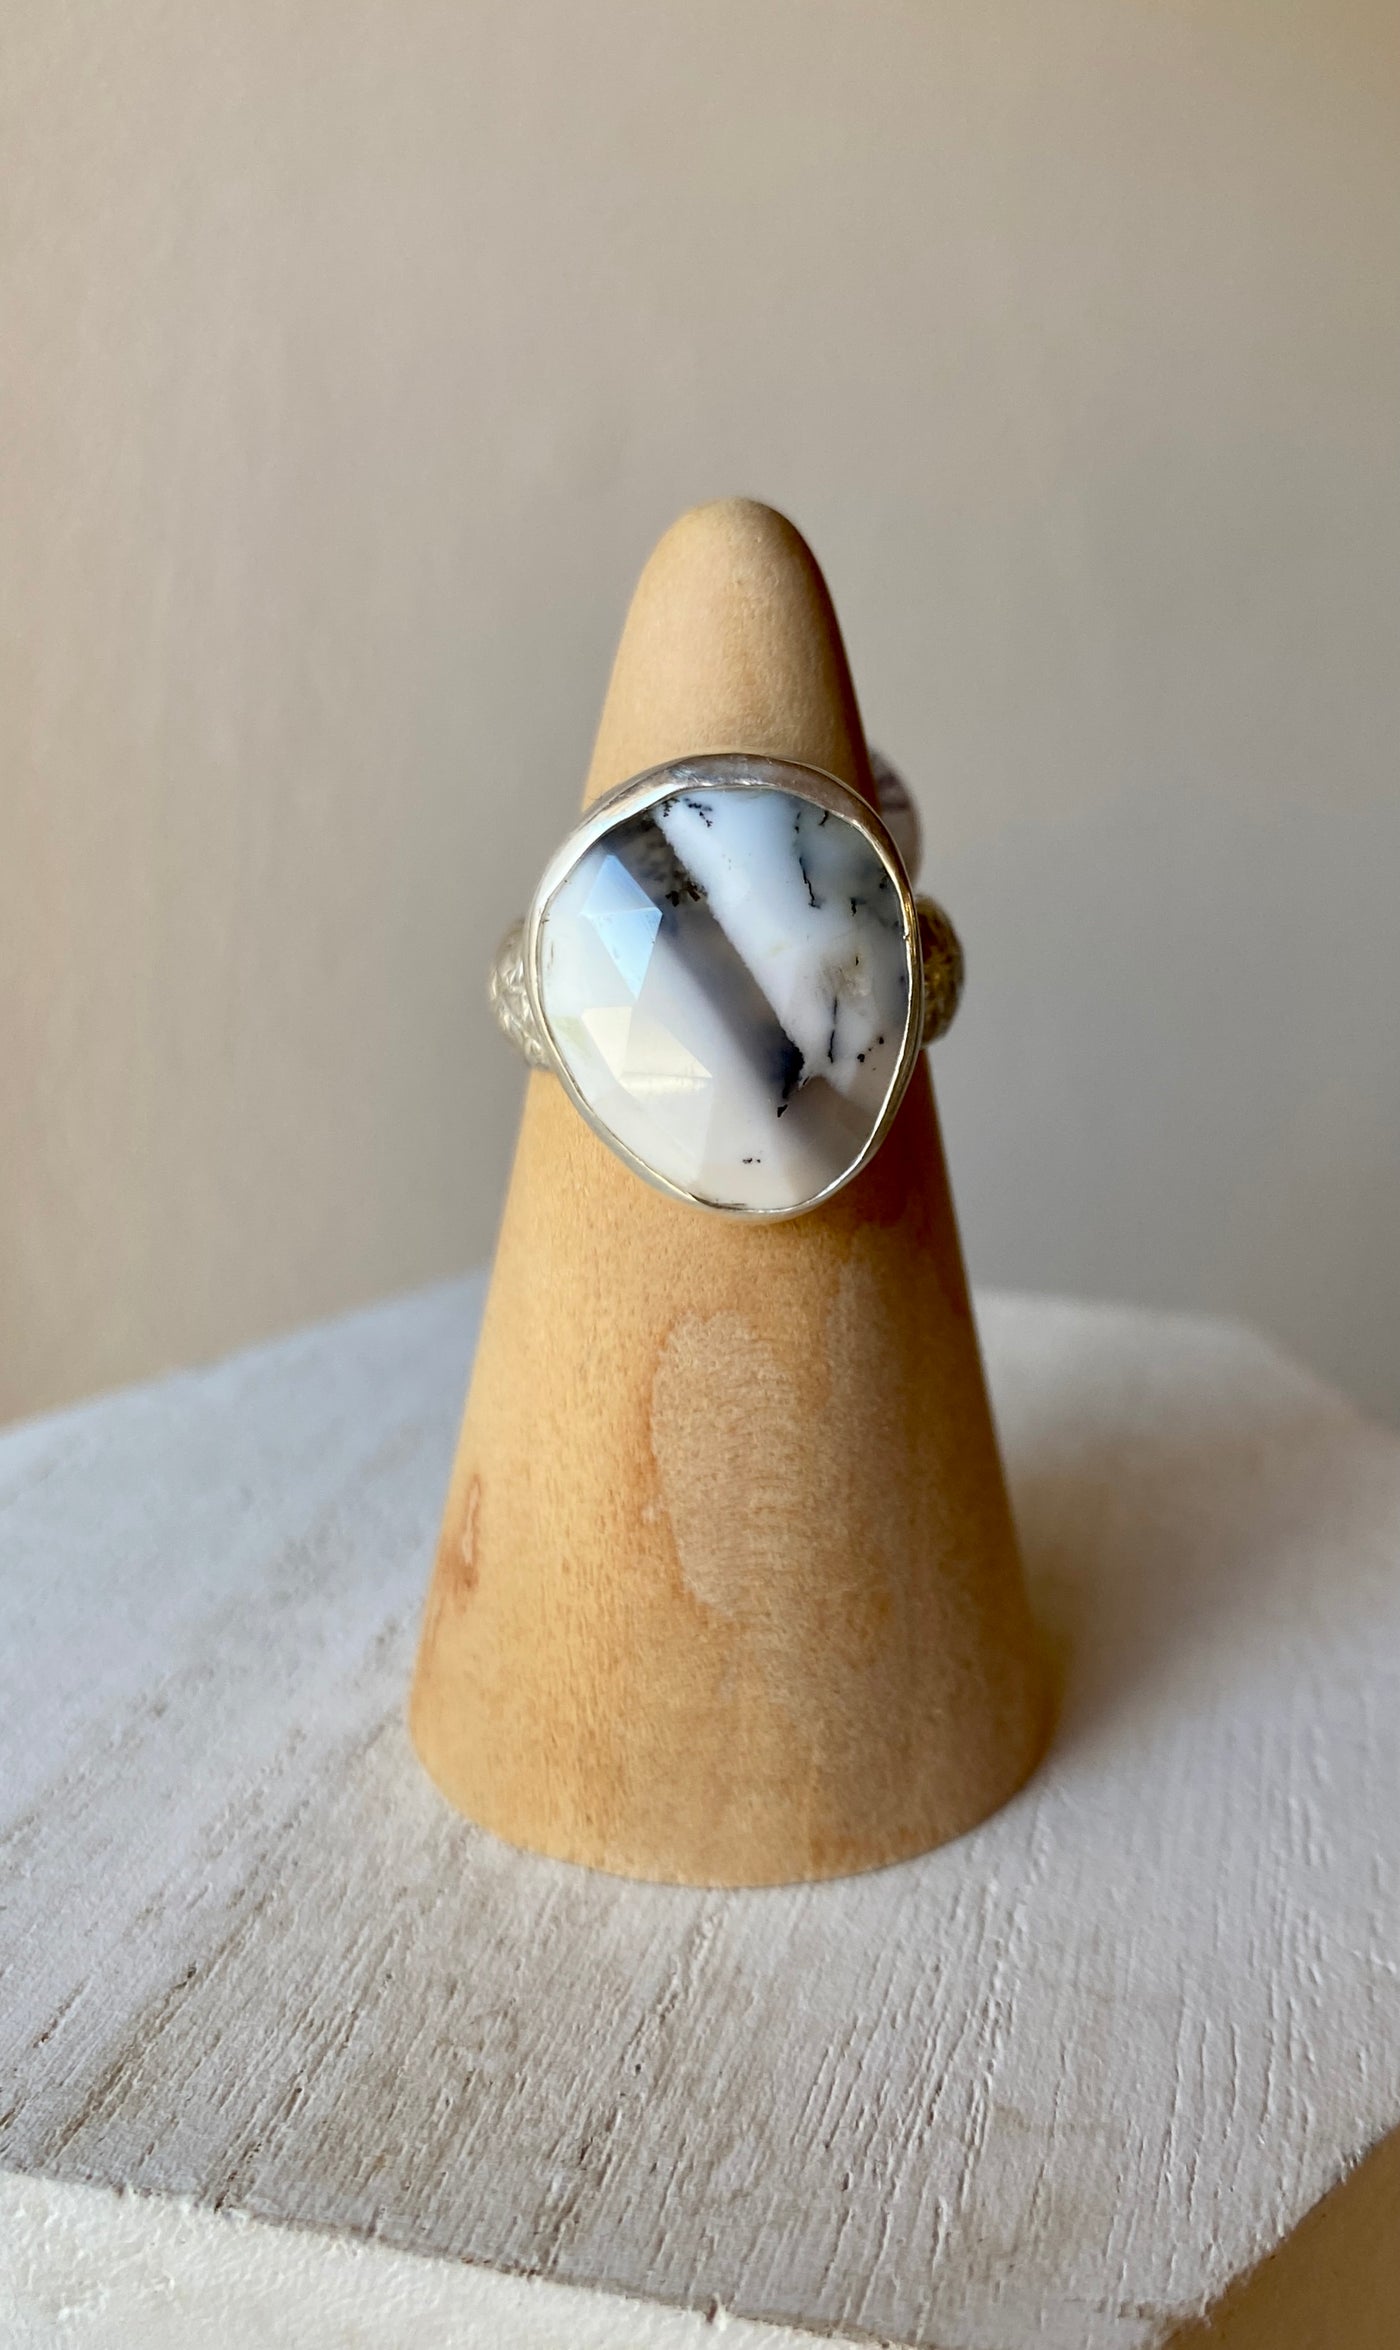 Faceted Dendritic Opal Ring Size 5.5